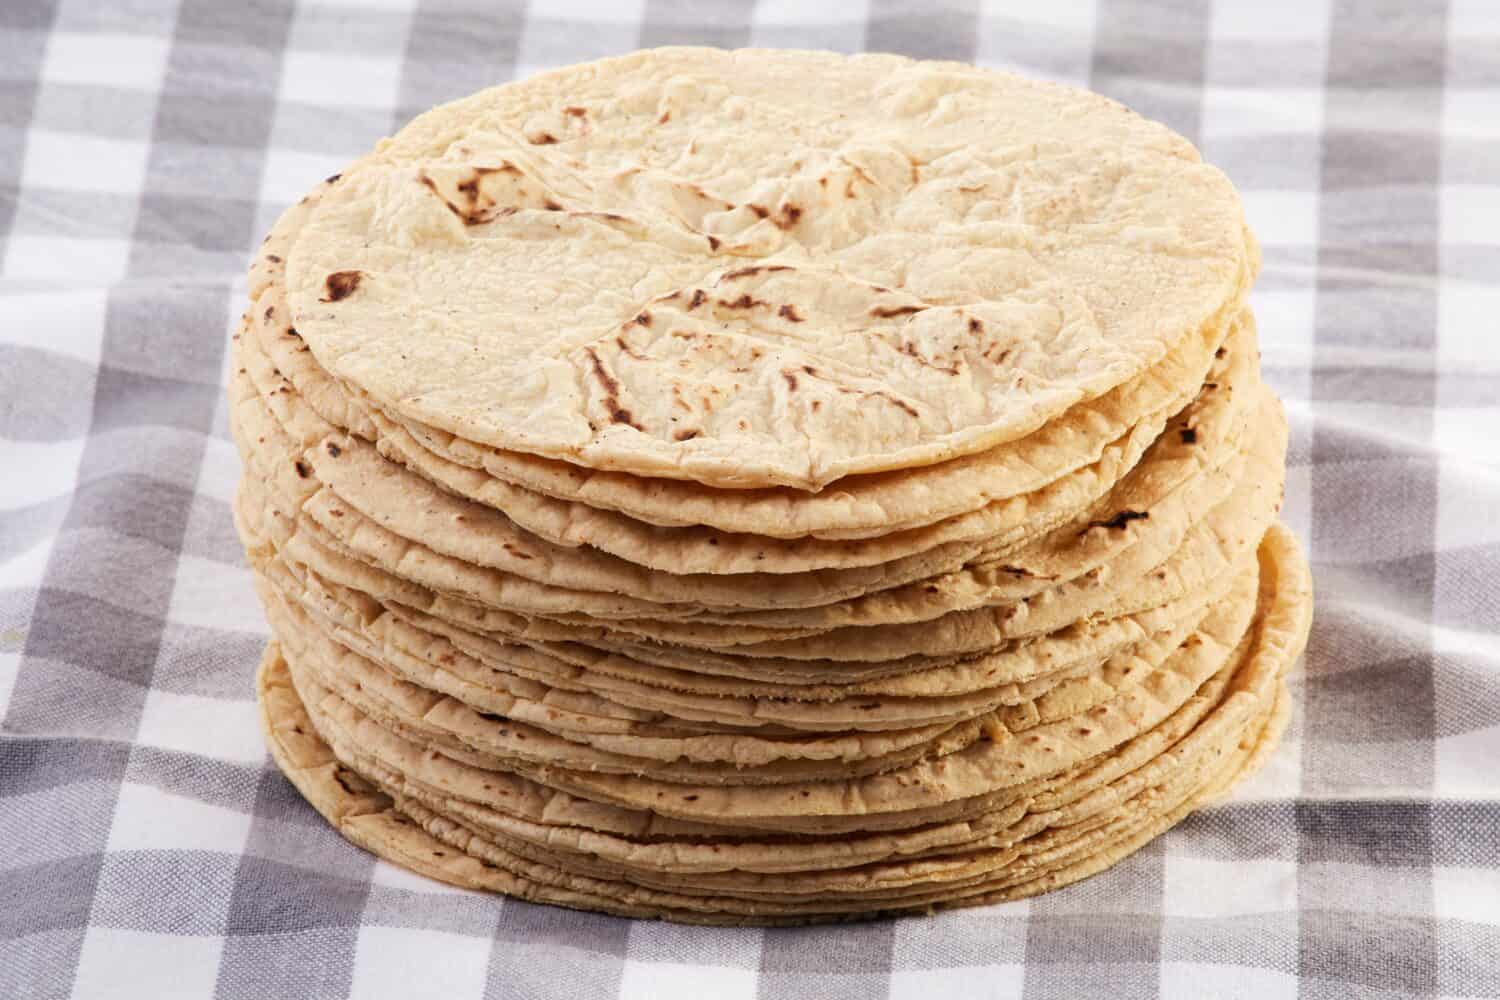 One kilo of fresh stacked tortillas on a white and grey checkered cloth.